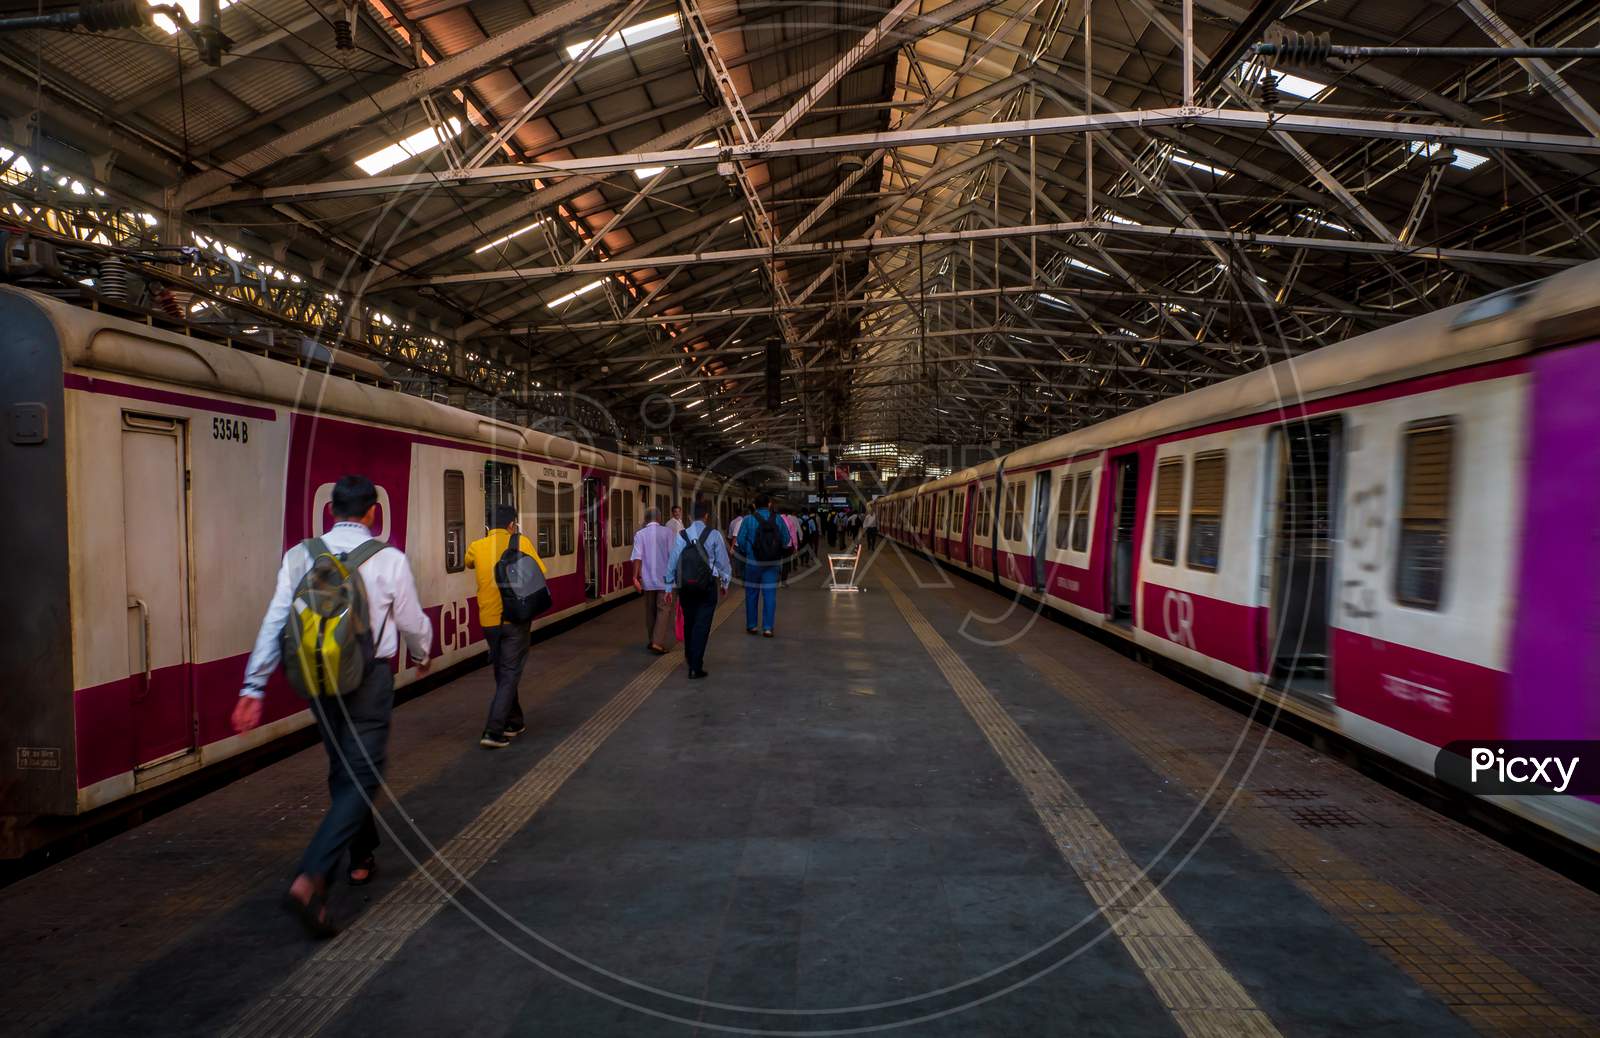 Mumbai Suburban Railway, One Of The Busiest Commuter Rail Systems In The World Having Most Severe Overcrowding In The World